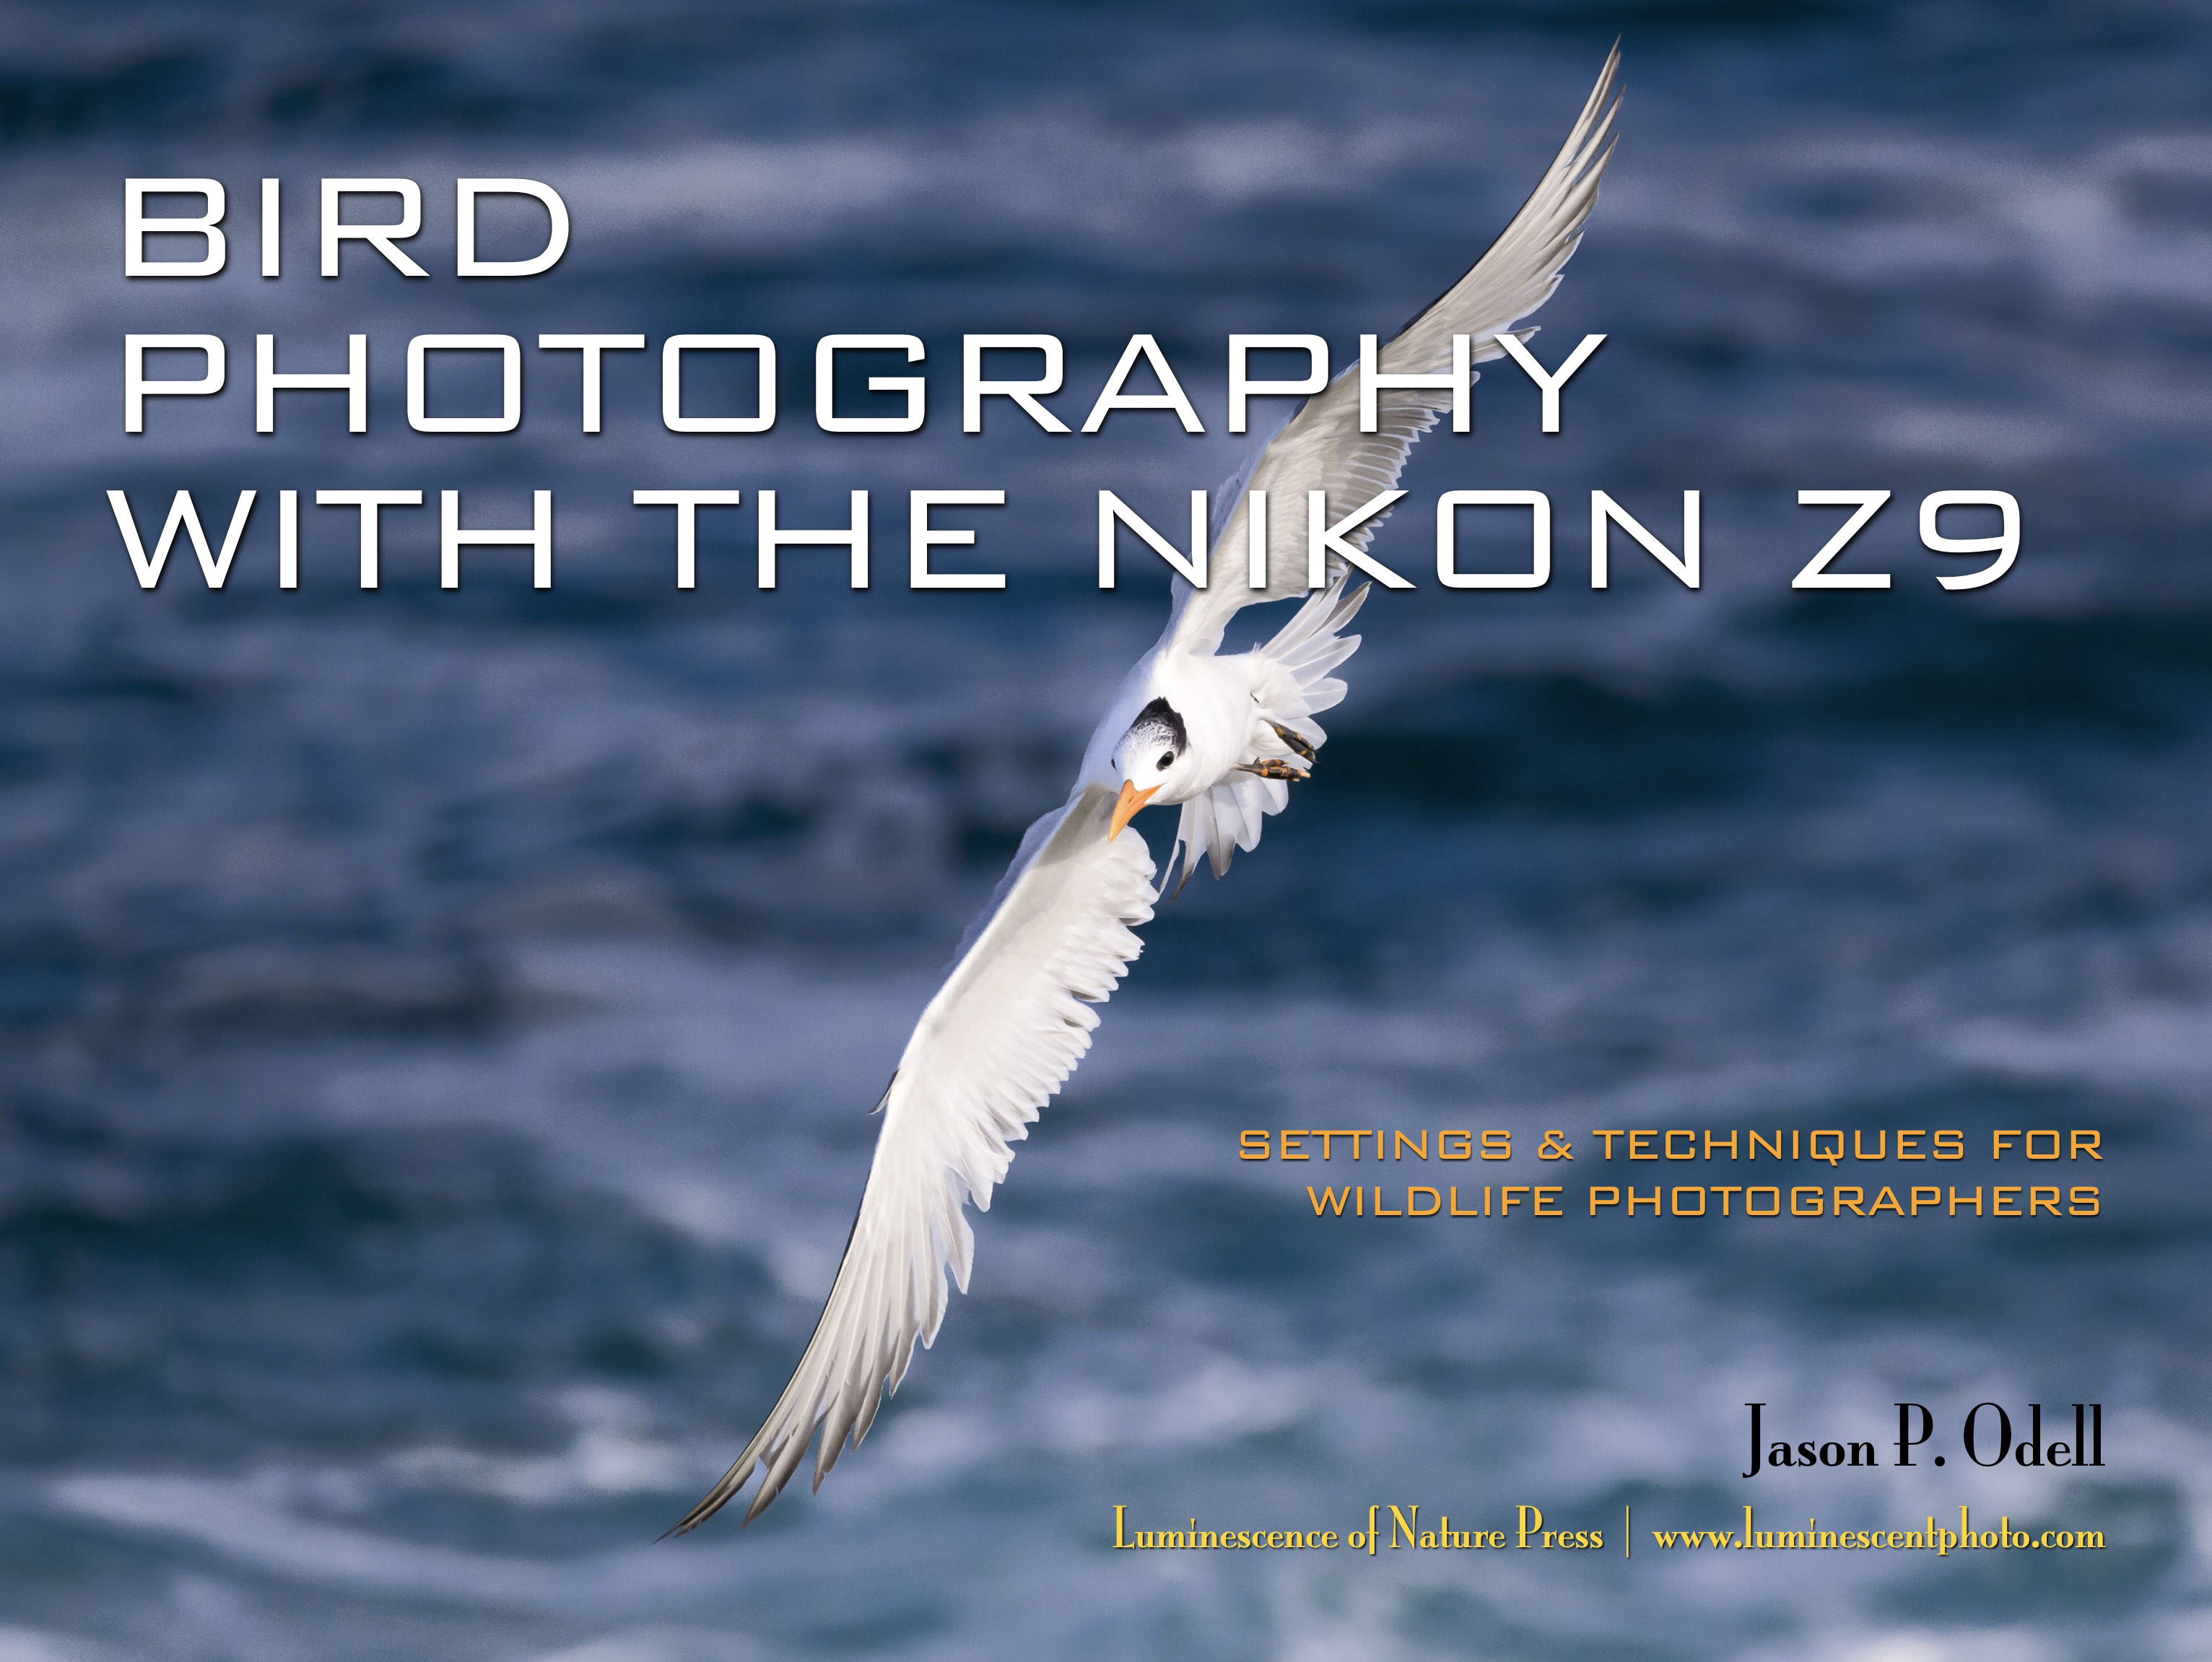 Bird Photography with the Nikon Z9 is a complete settings guide to the Nikon Z9 camera